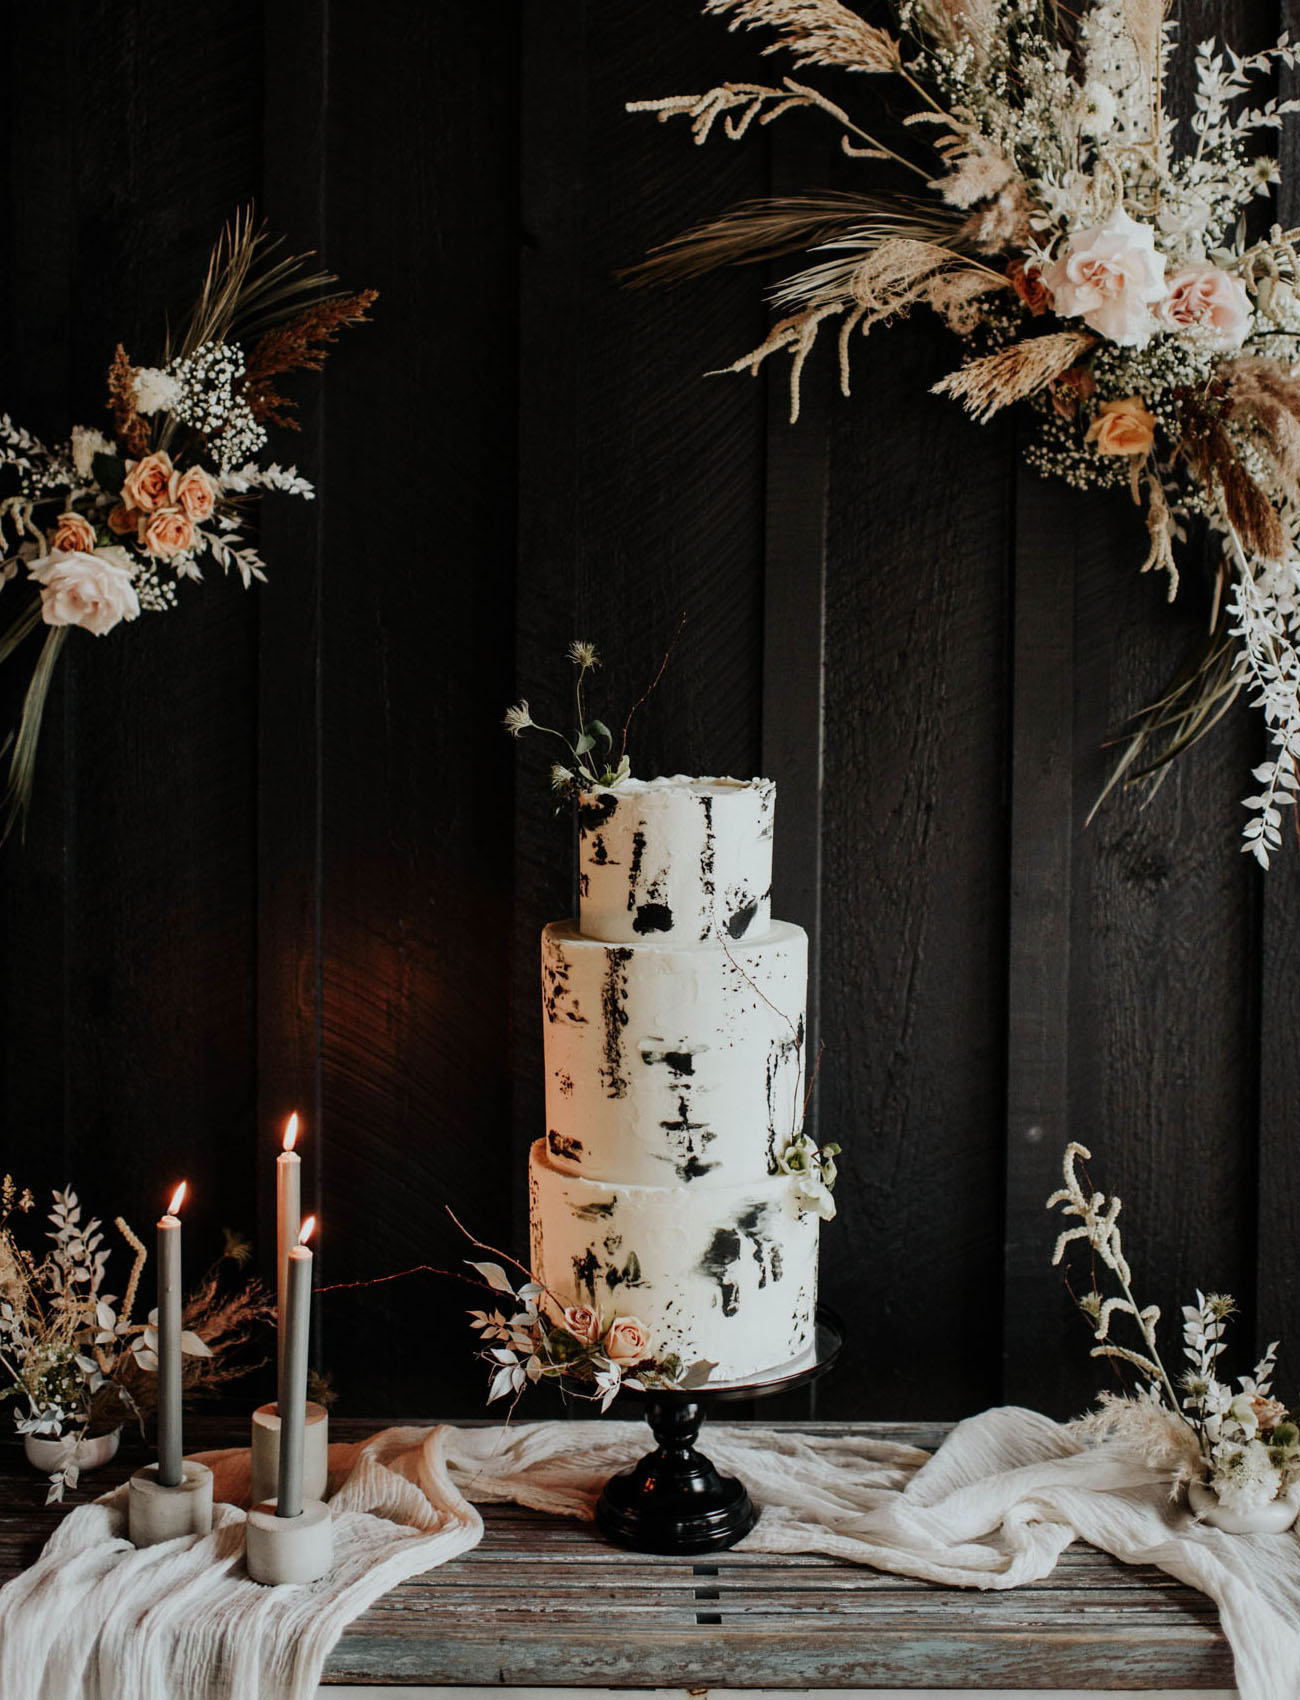 The wedding cake was white, with black brushstrokes and some dried blooms on top